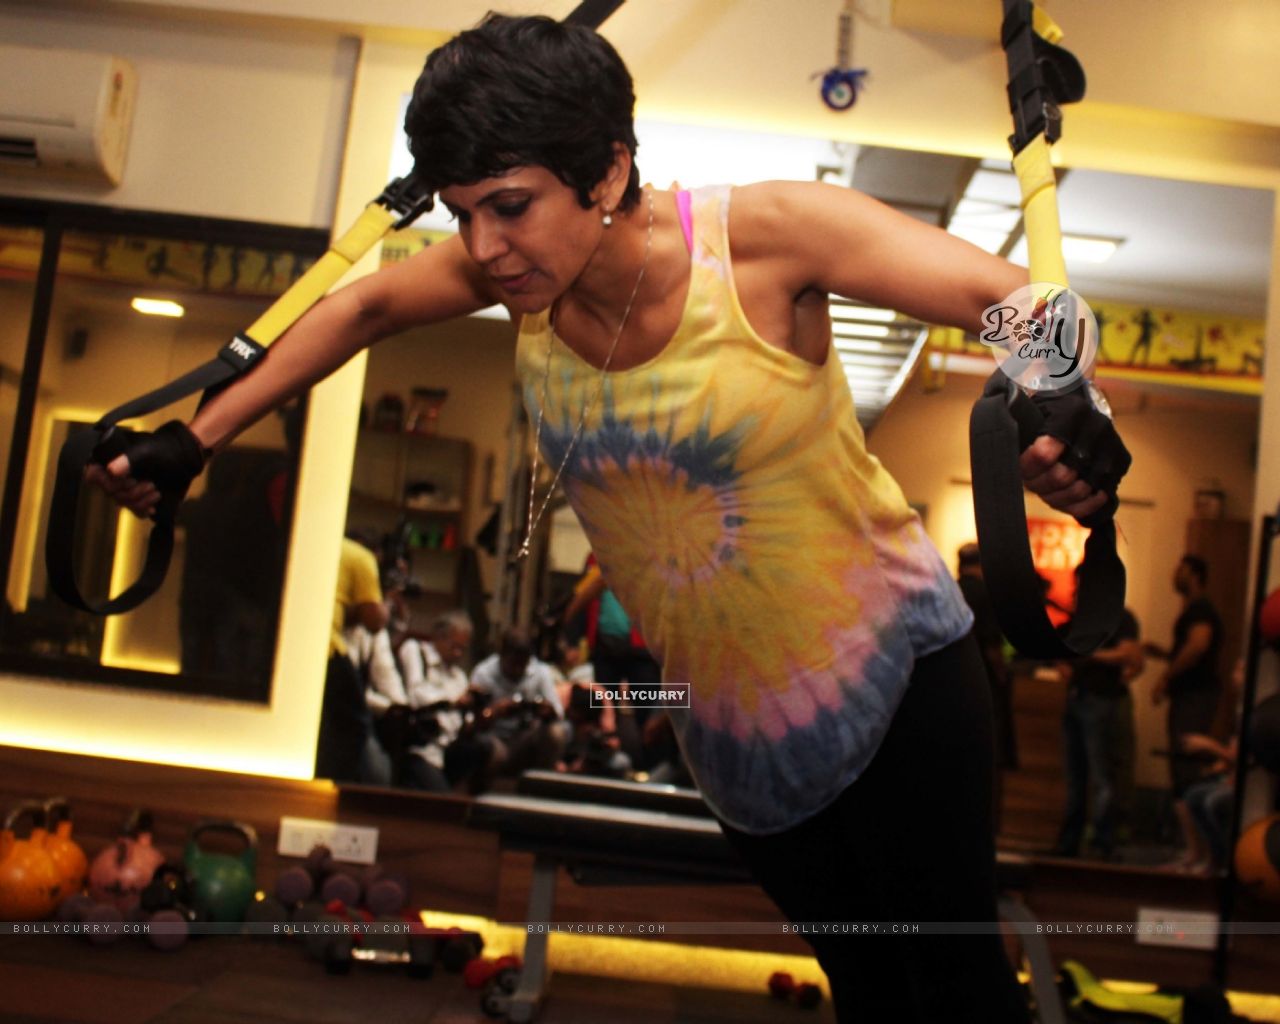 Wallpaper Mandira Bedi Shares Her Fitness Mantra At Muscle Talk Gym In Chembur 393210 Size